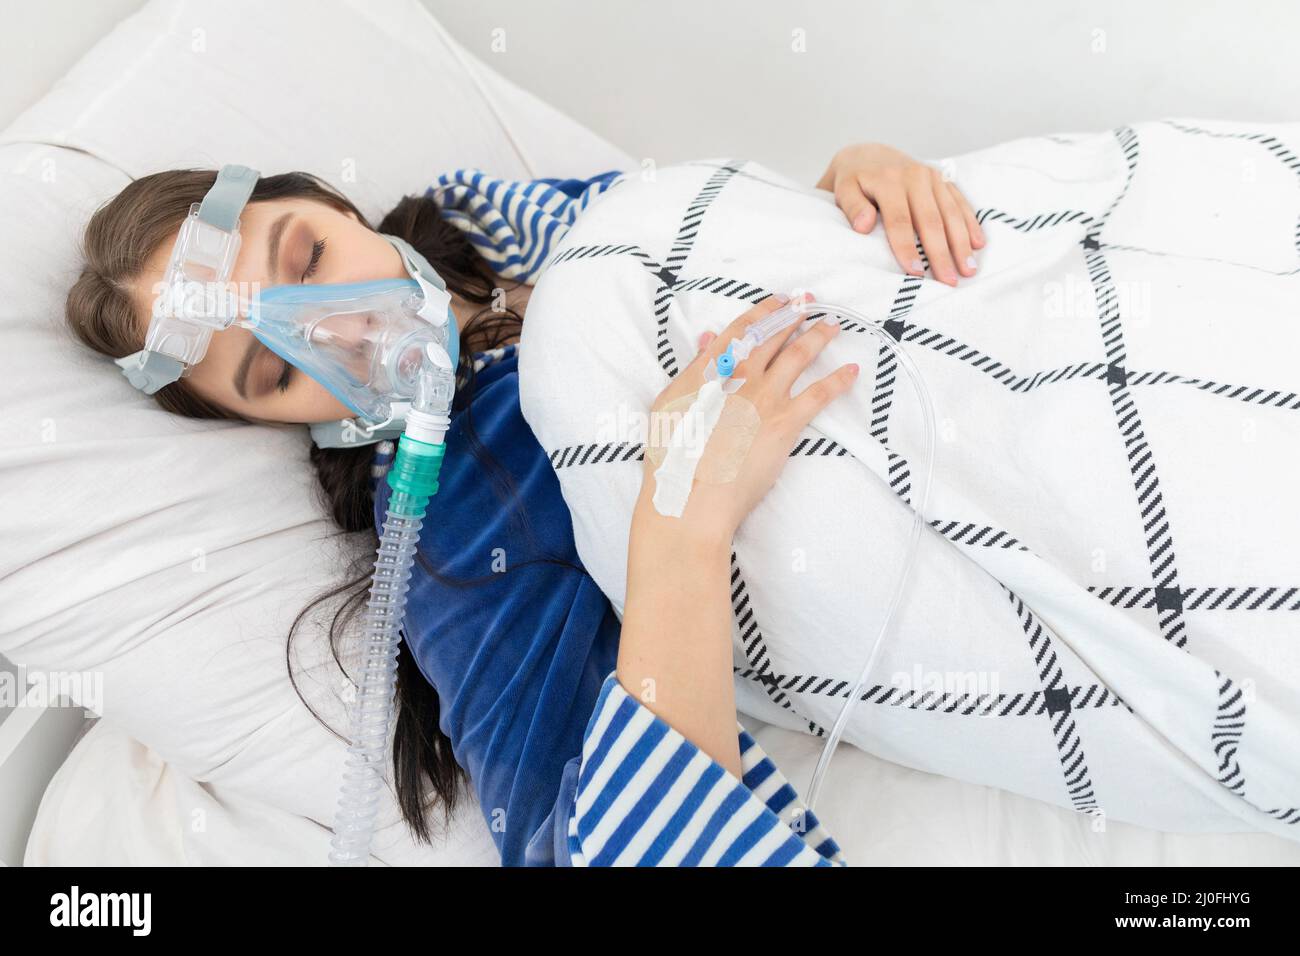 Seriously ill teenager connected to a respirator to support breathing. COVID-19 infection. Stock Photo